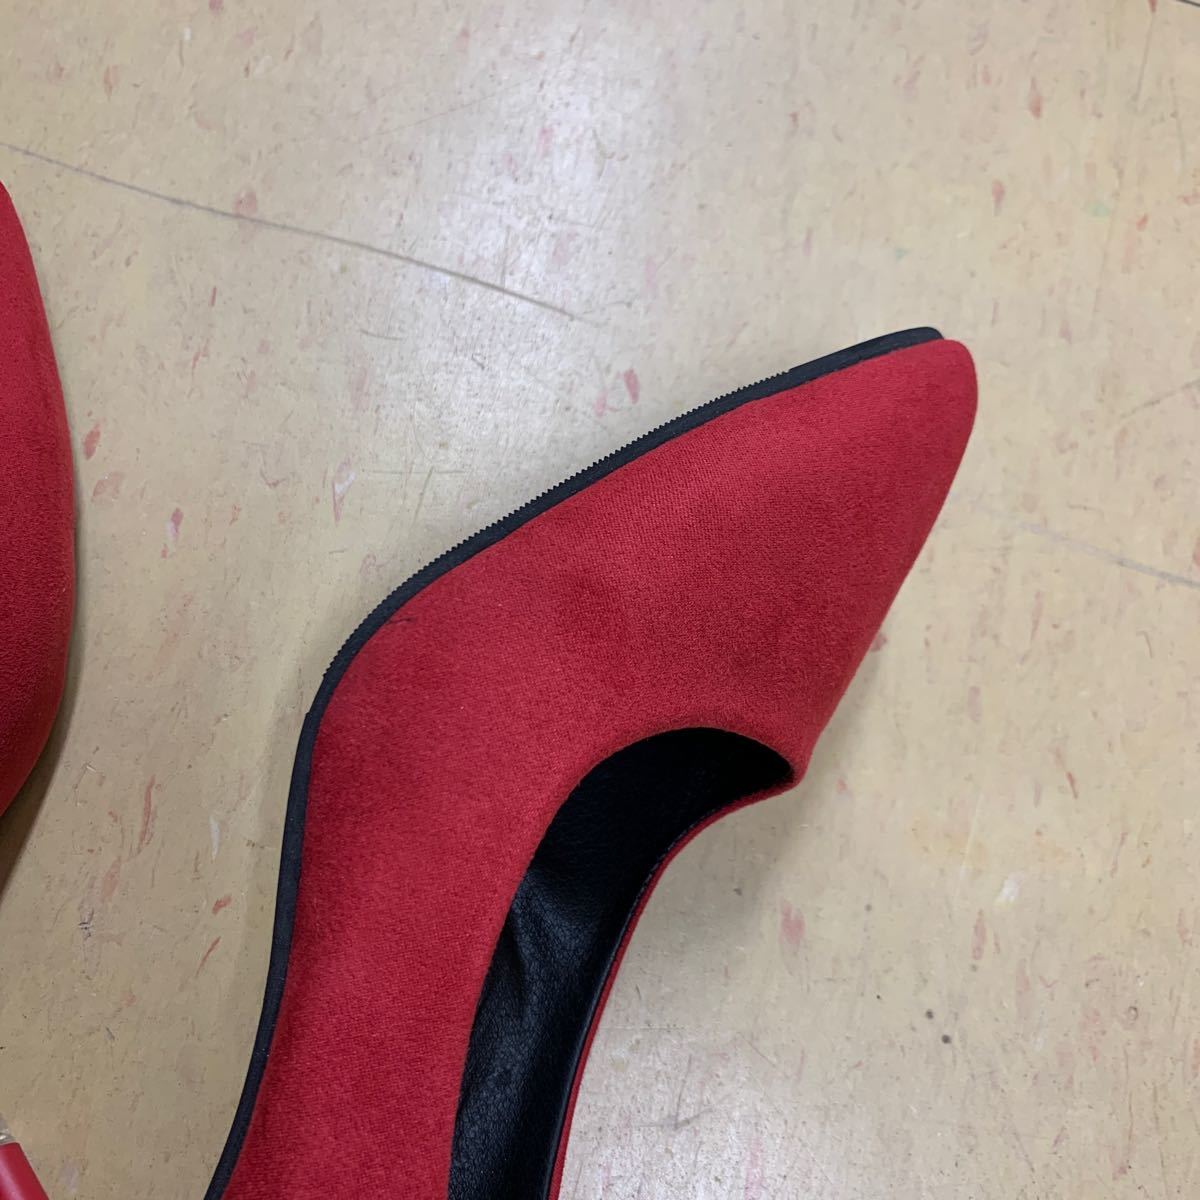  new goods beautiful goods approximately 7cm heel suede style pumps red 24cm 24 centimeter 7 centimeter 24.0 red high heel pin heel velour style . hand shoes lady's 